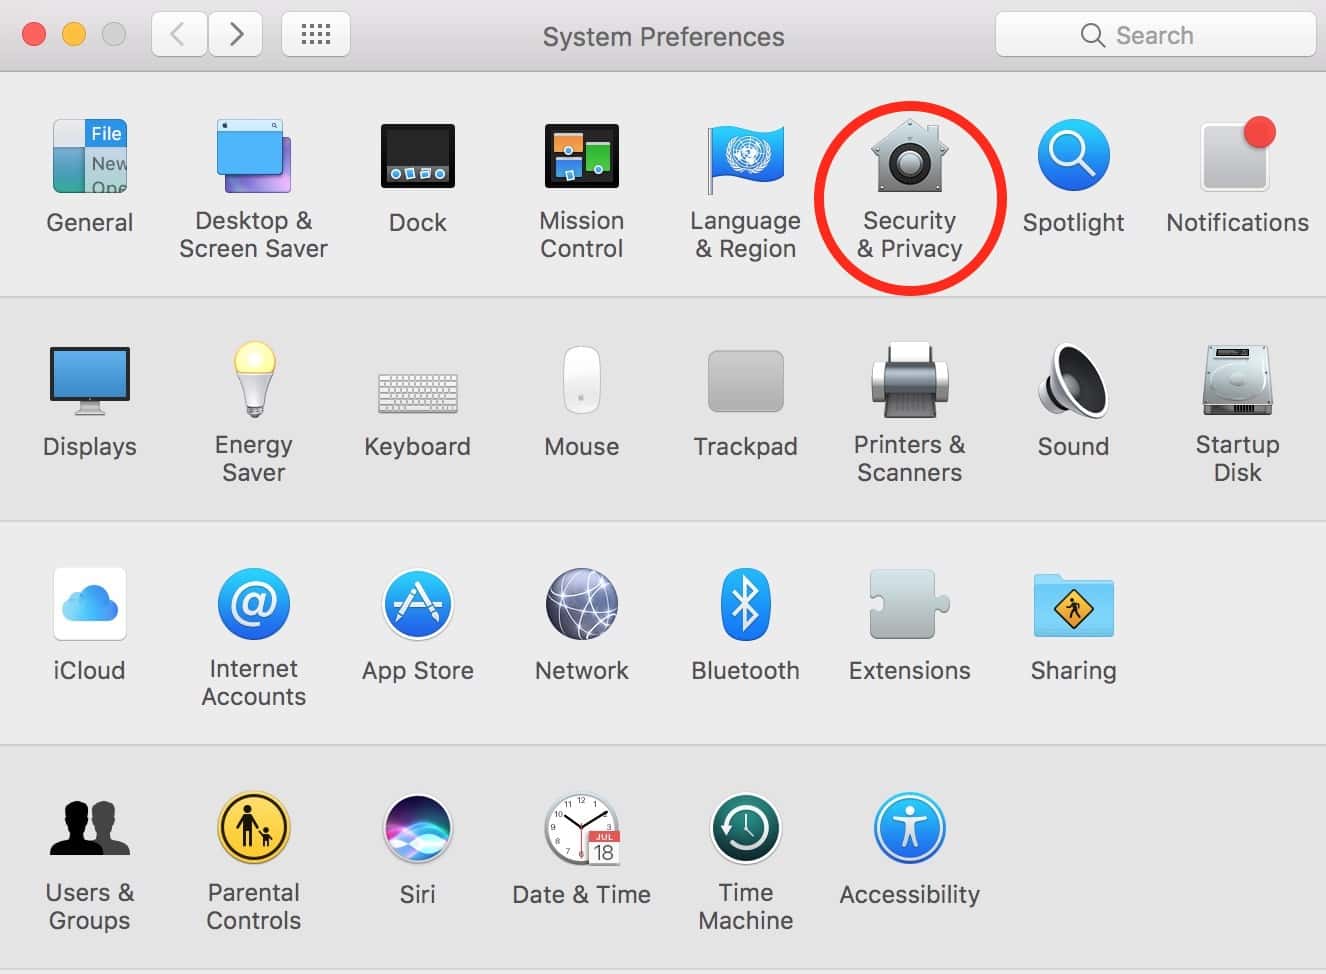 Use the Security & Privacy settings in System Preferences to add a password to your Mac